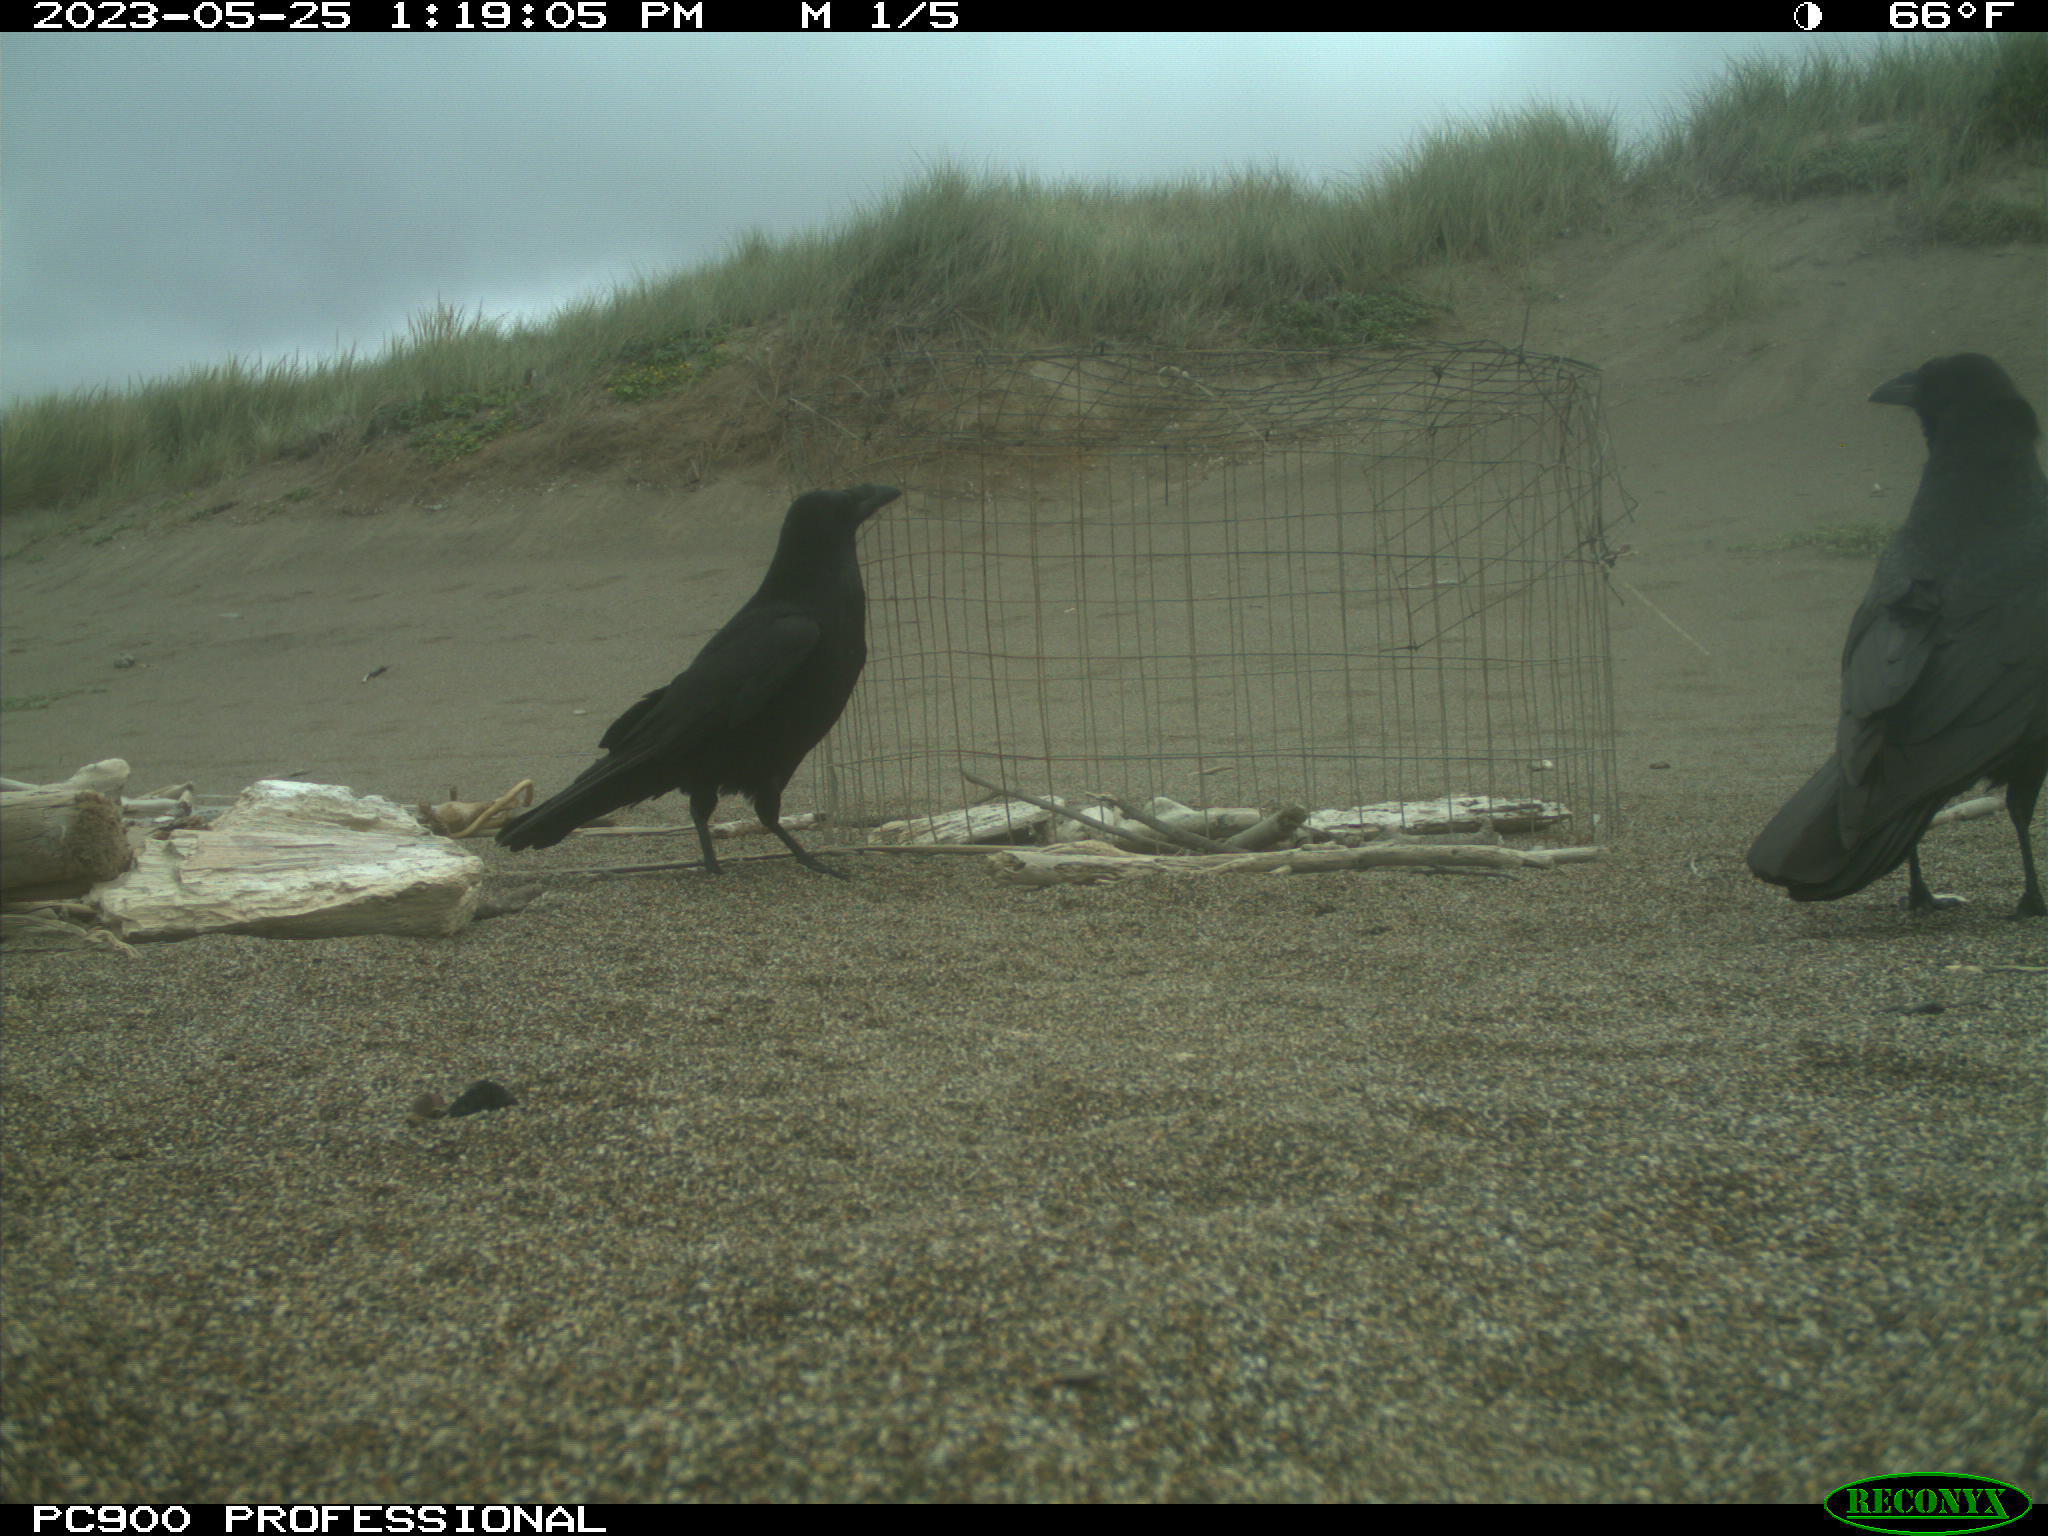 Two black common ravens standing adjacent to a small wire exclosure on a sandy beach.